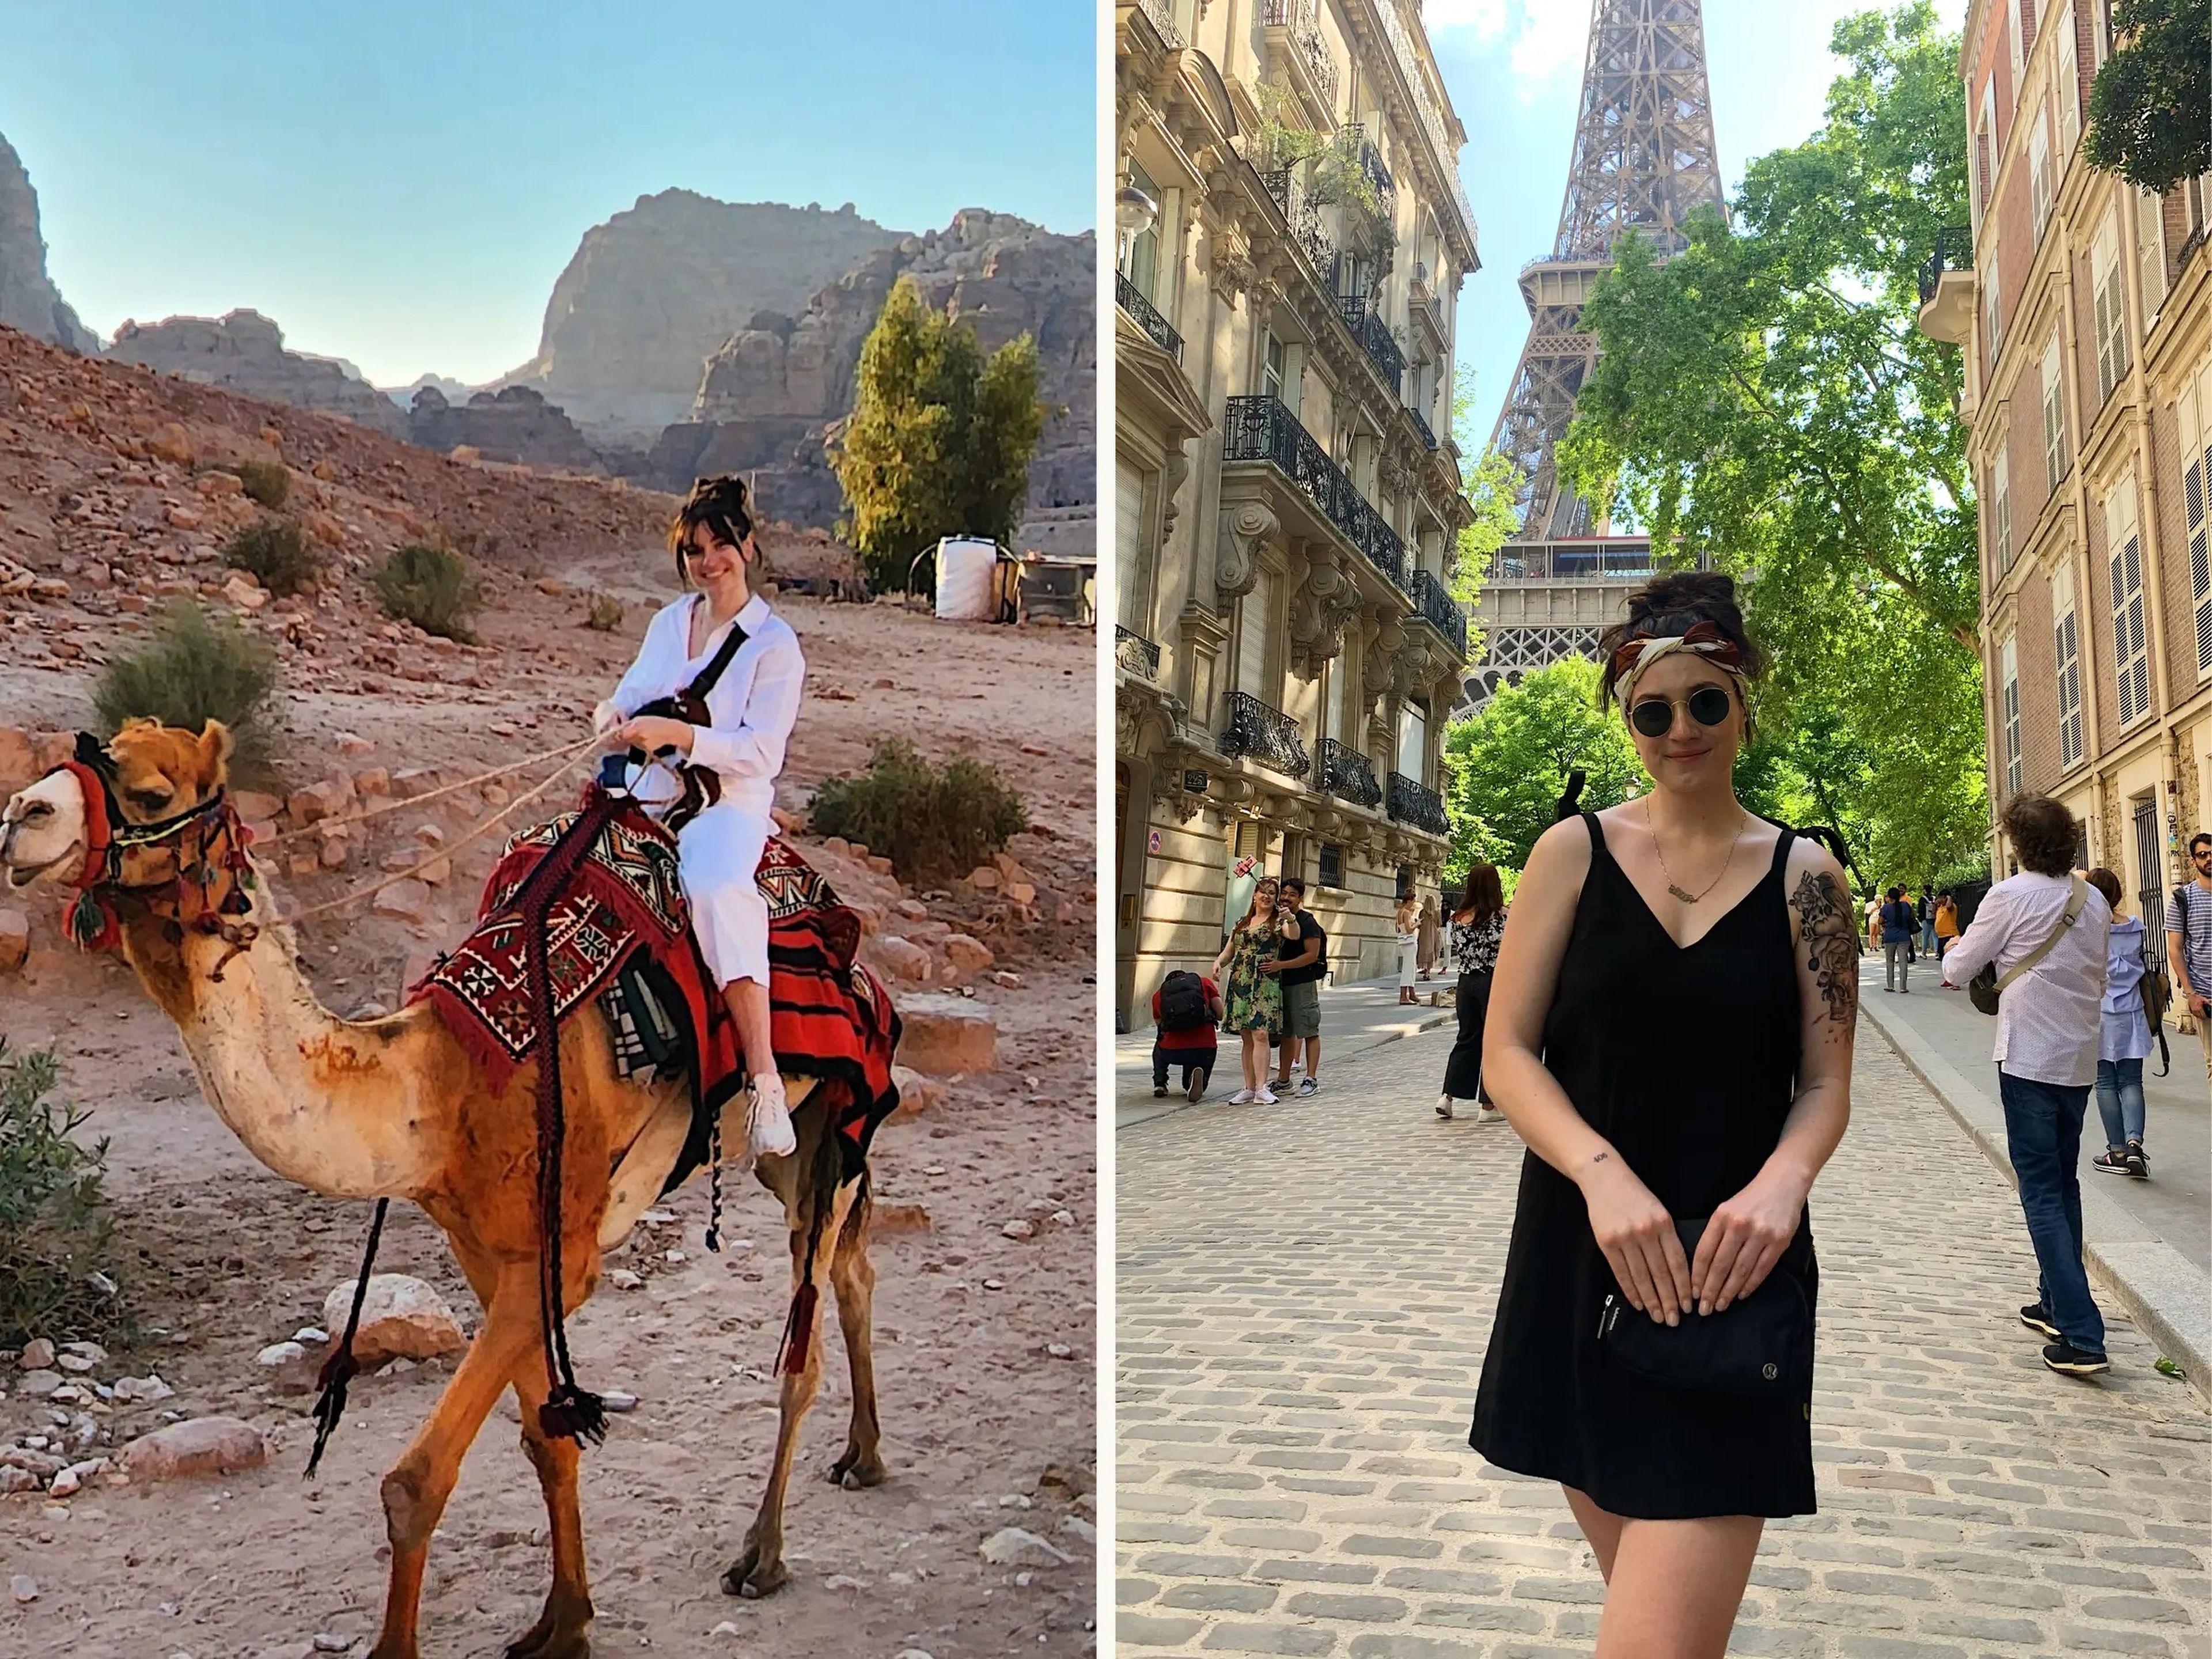 The author in Petra, Jordan (left); and at the Eiffel Tower in Paris, France (right).